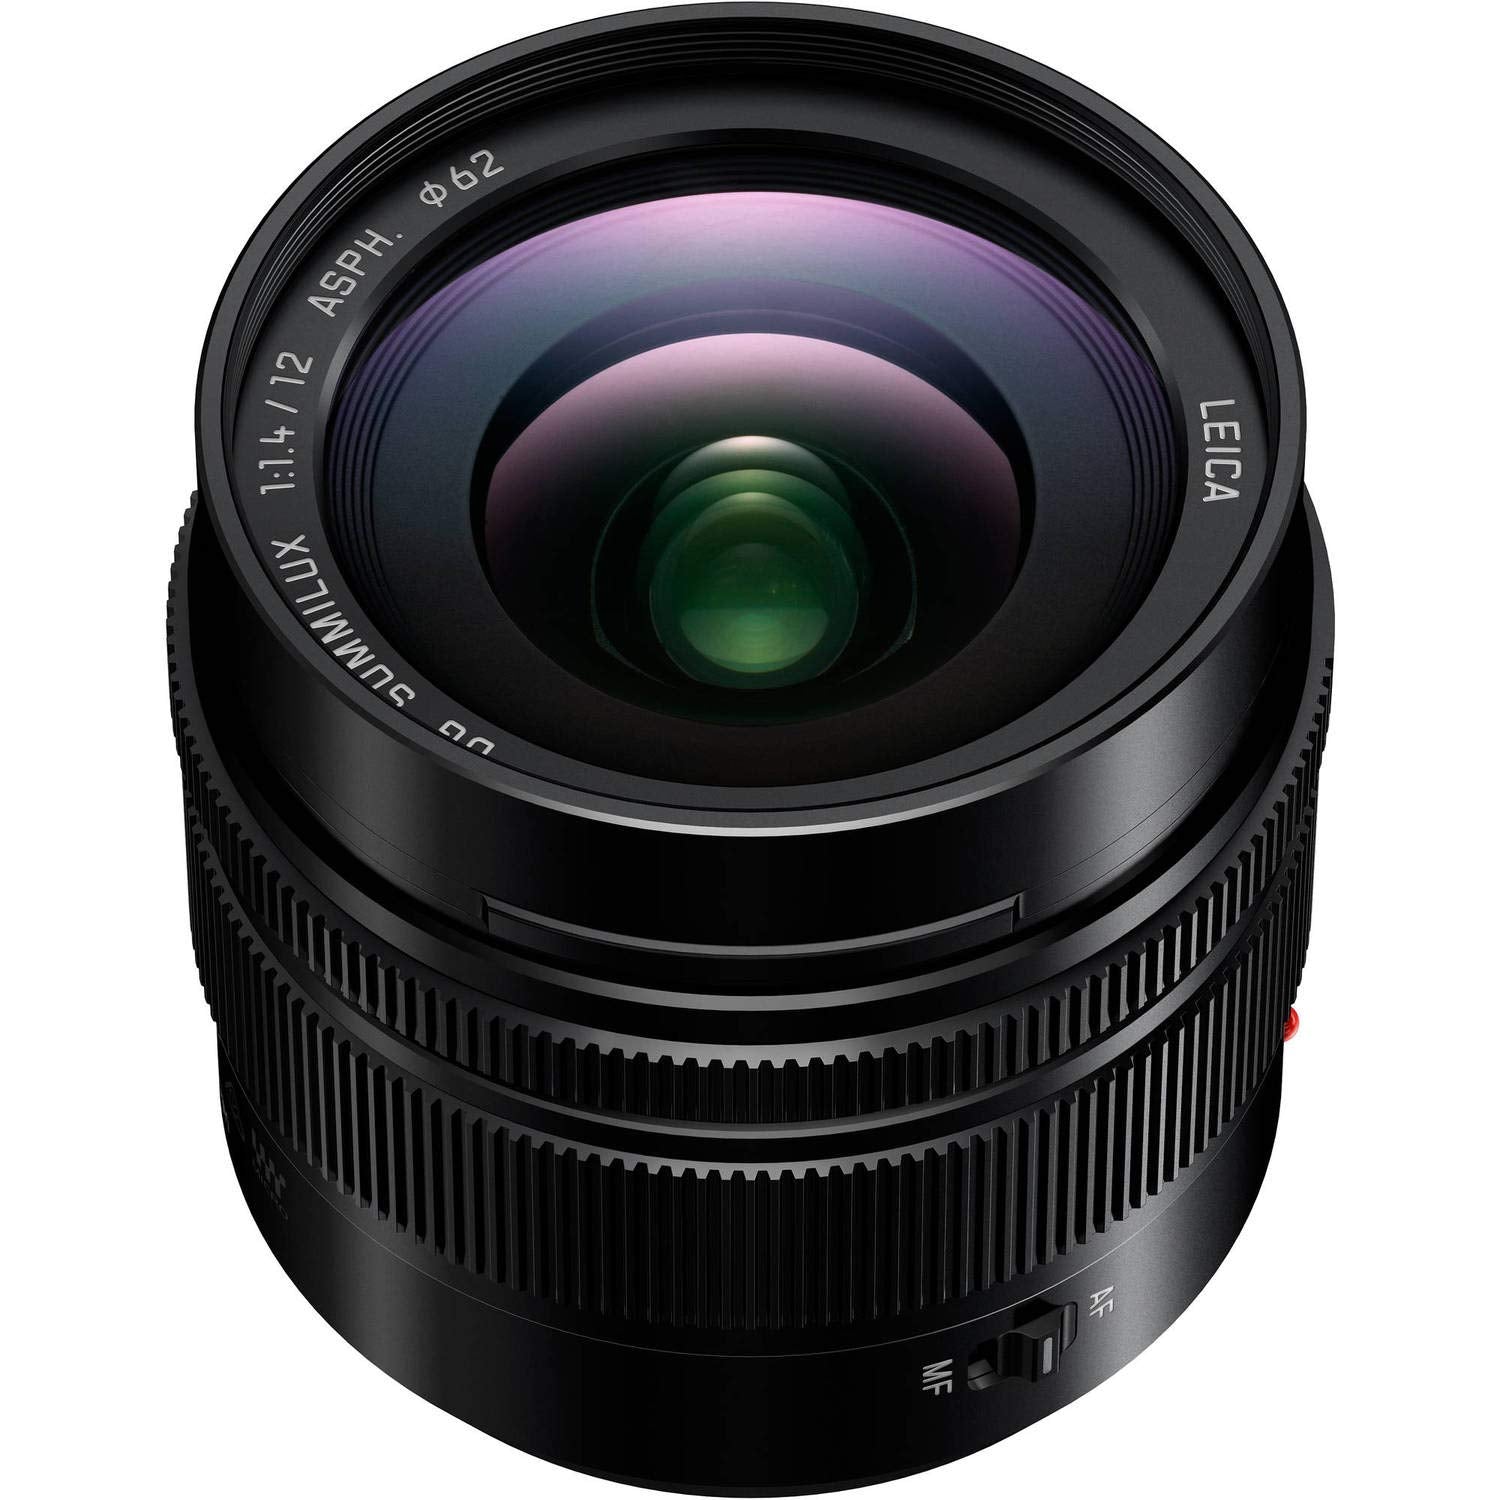 Panasonic Leica DG Summilux 12mm f/1.4 ASPH. Lens with Filter Kit, Lens Case, Cleaning Kit and Extended Warranty